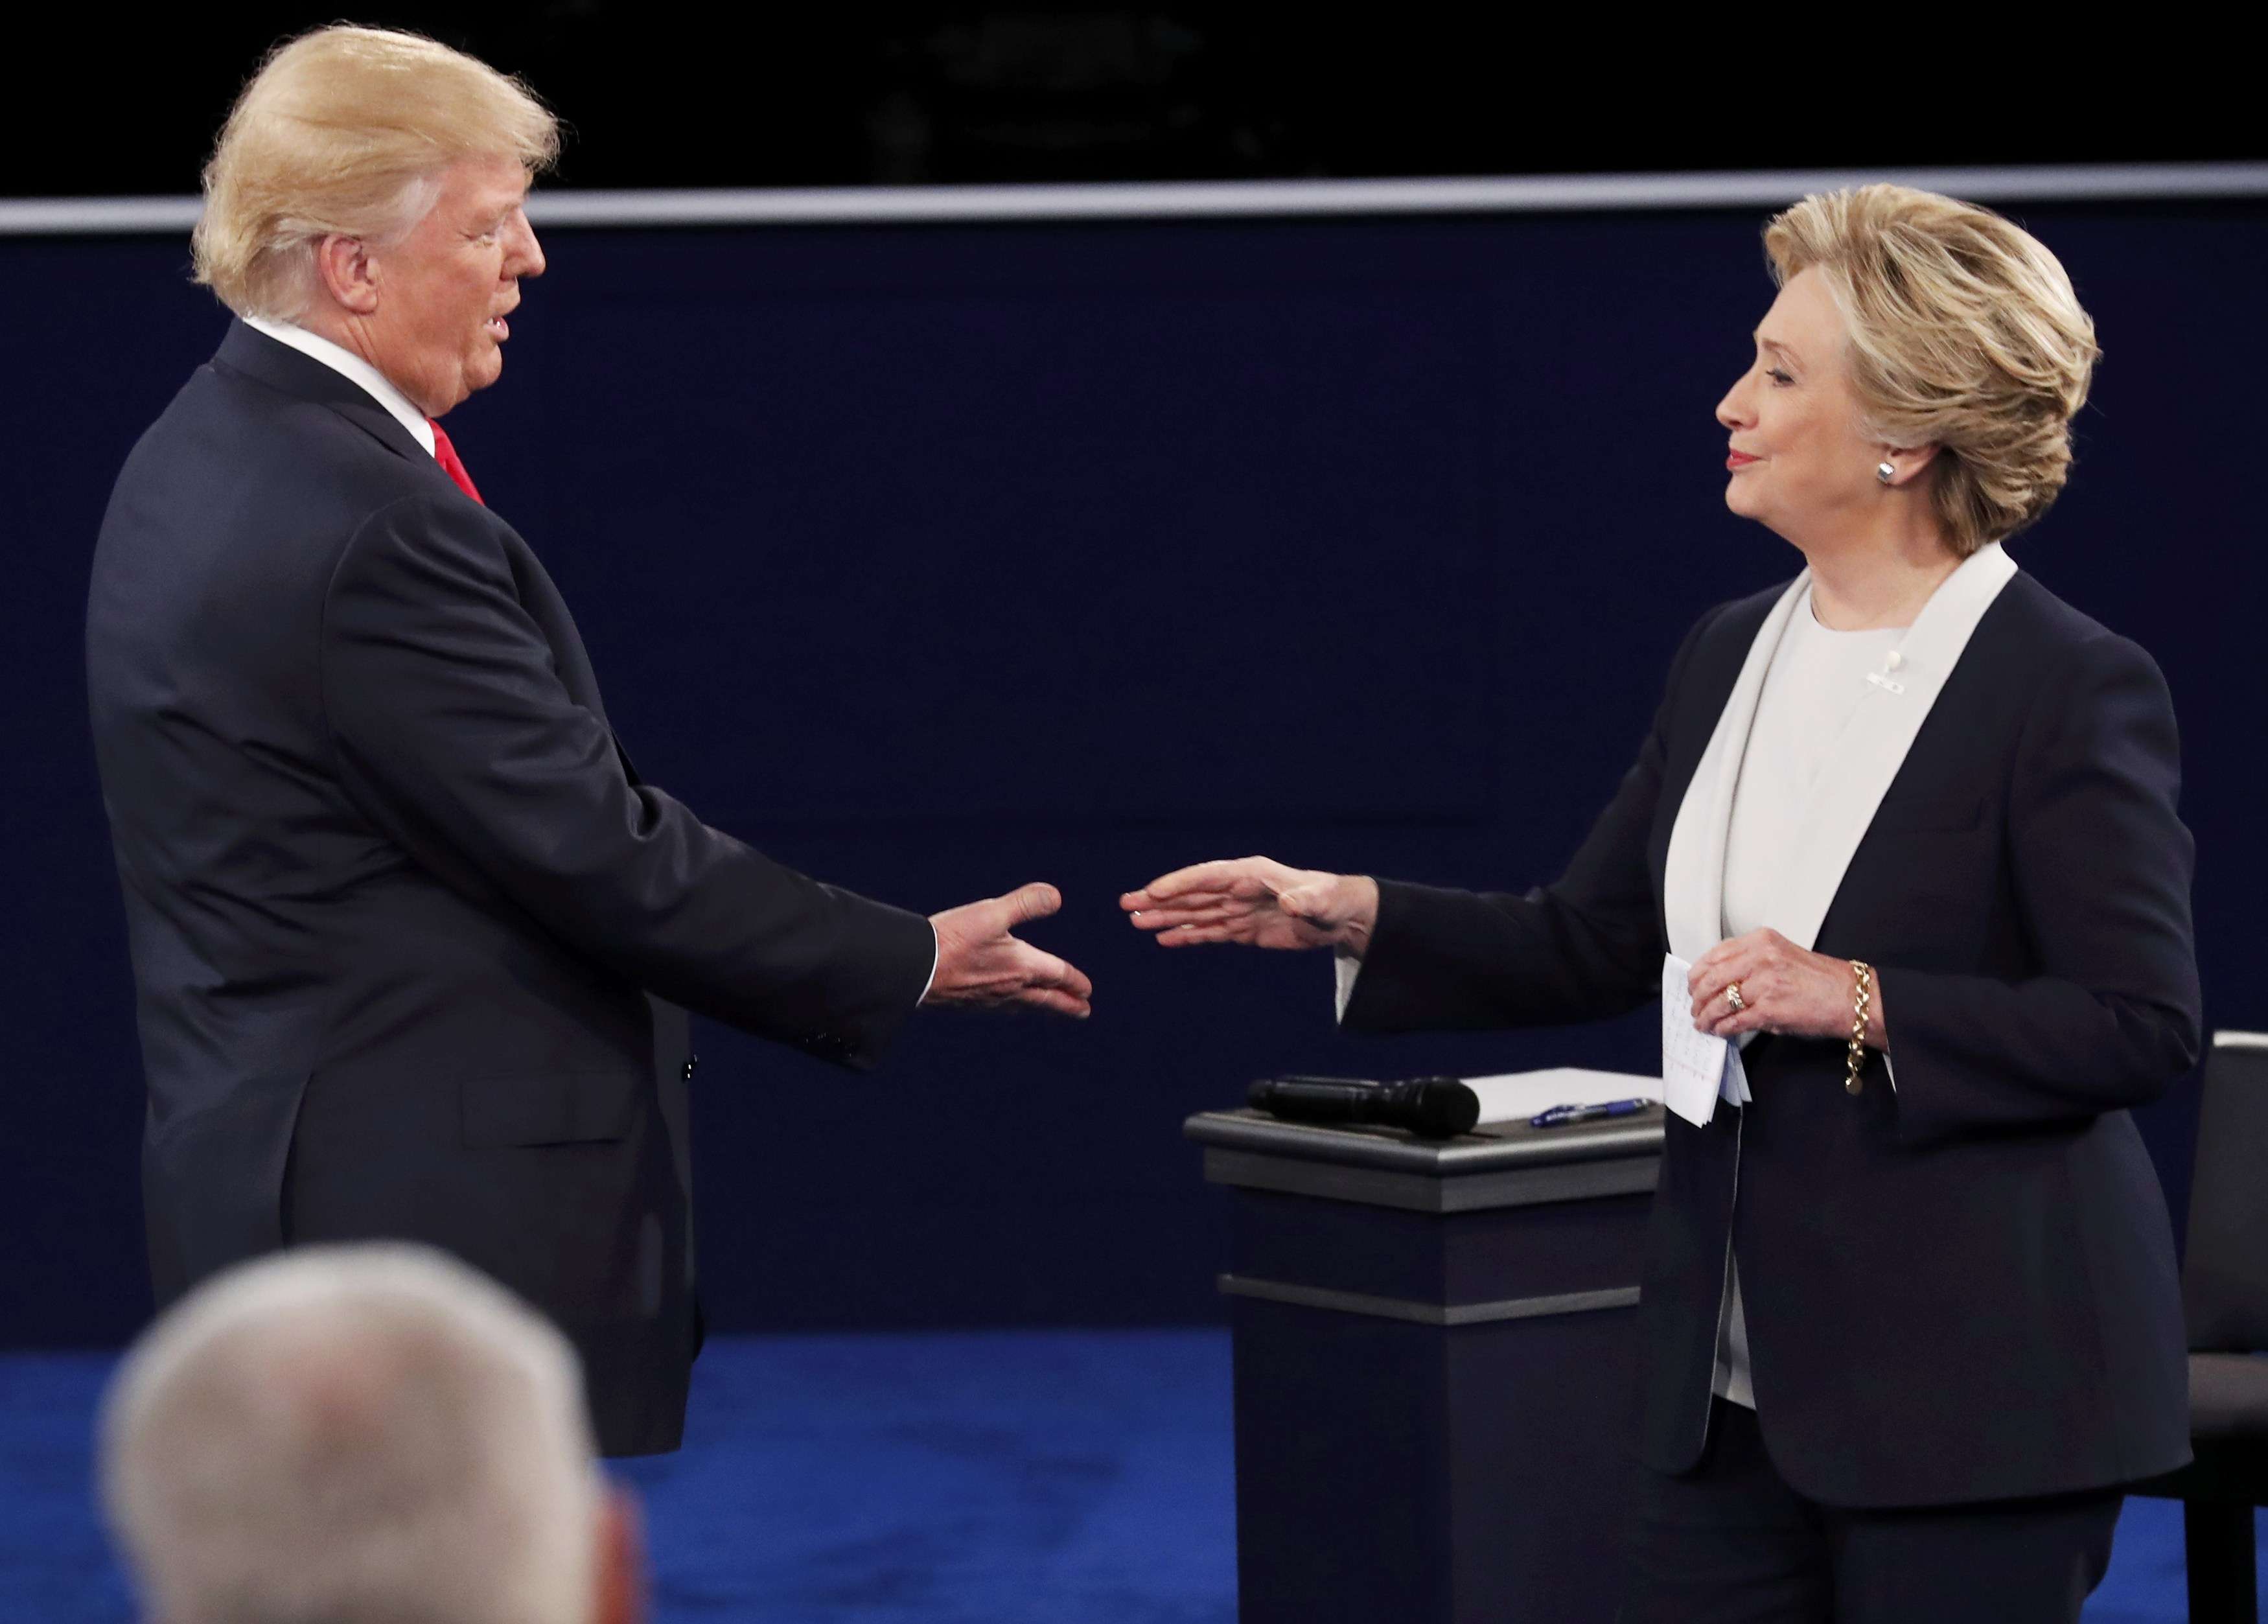 Republican nominee Donald Trump and Democratic nominee Hillary Clinton close the second US presidential debate with a handshake. Photo: Reuters